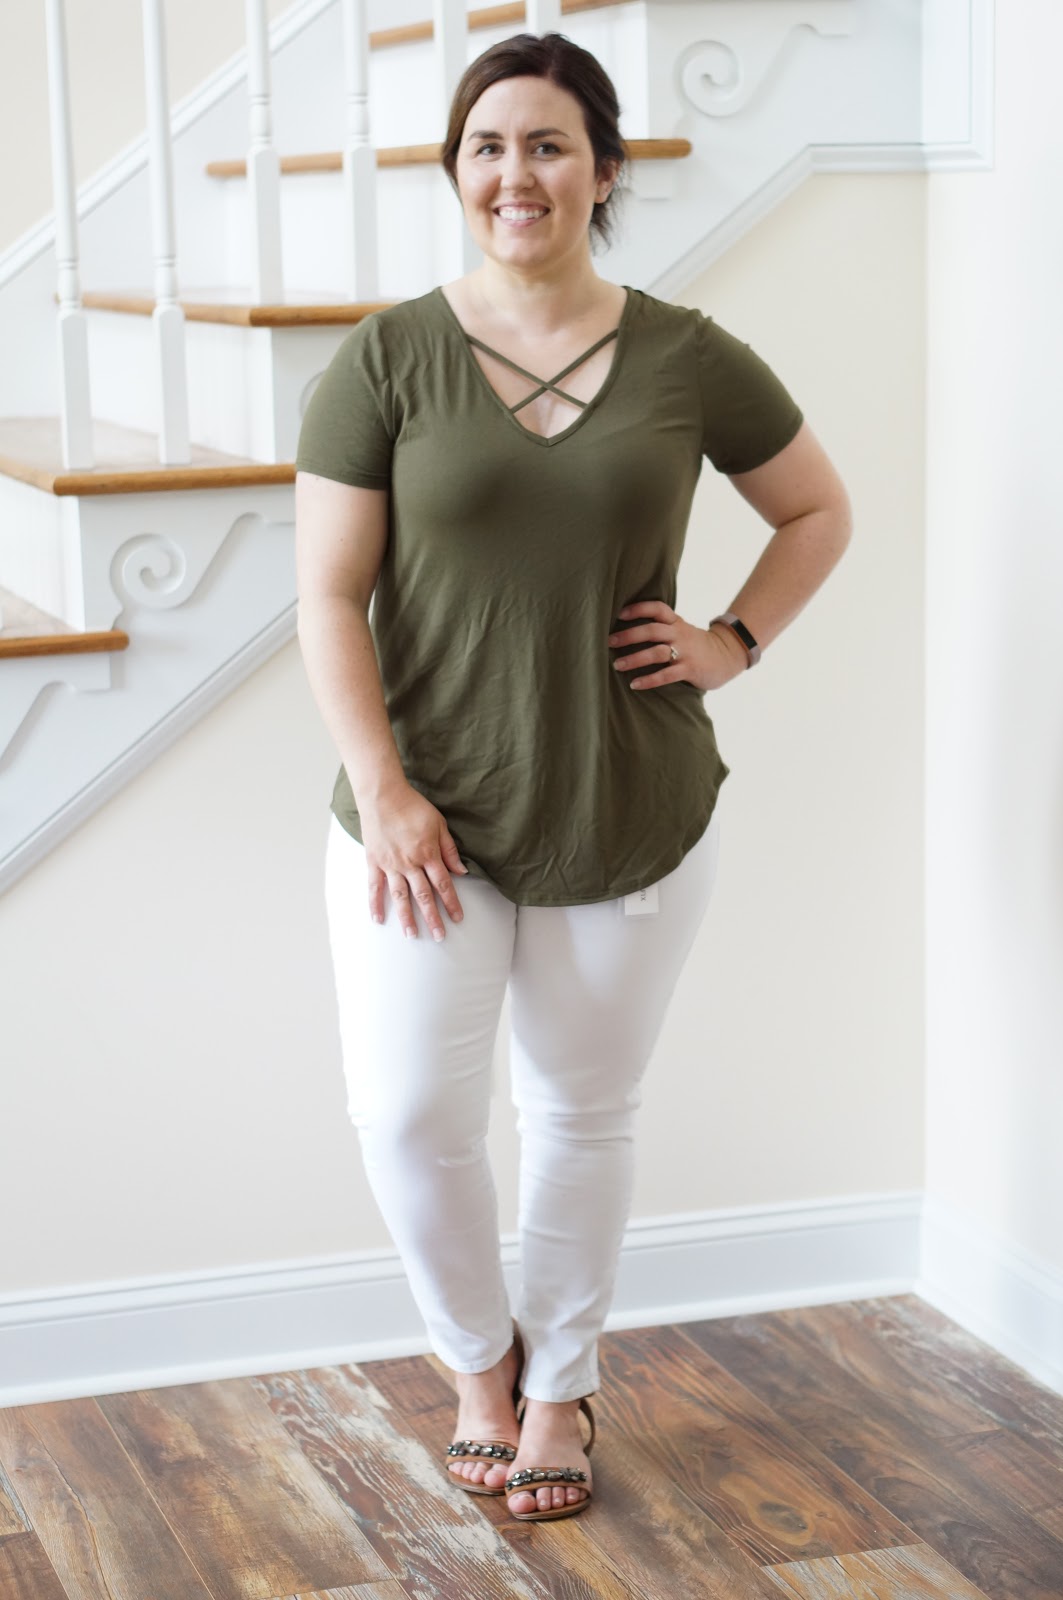 Popular North Caroilna style blogger Rebecca Lately shares her Stitch Fix outfits for May!  Check out what she got and what she kept!